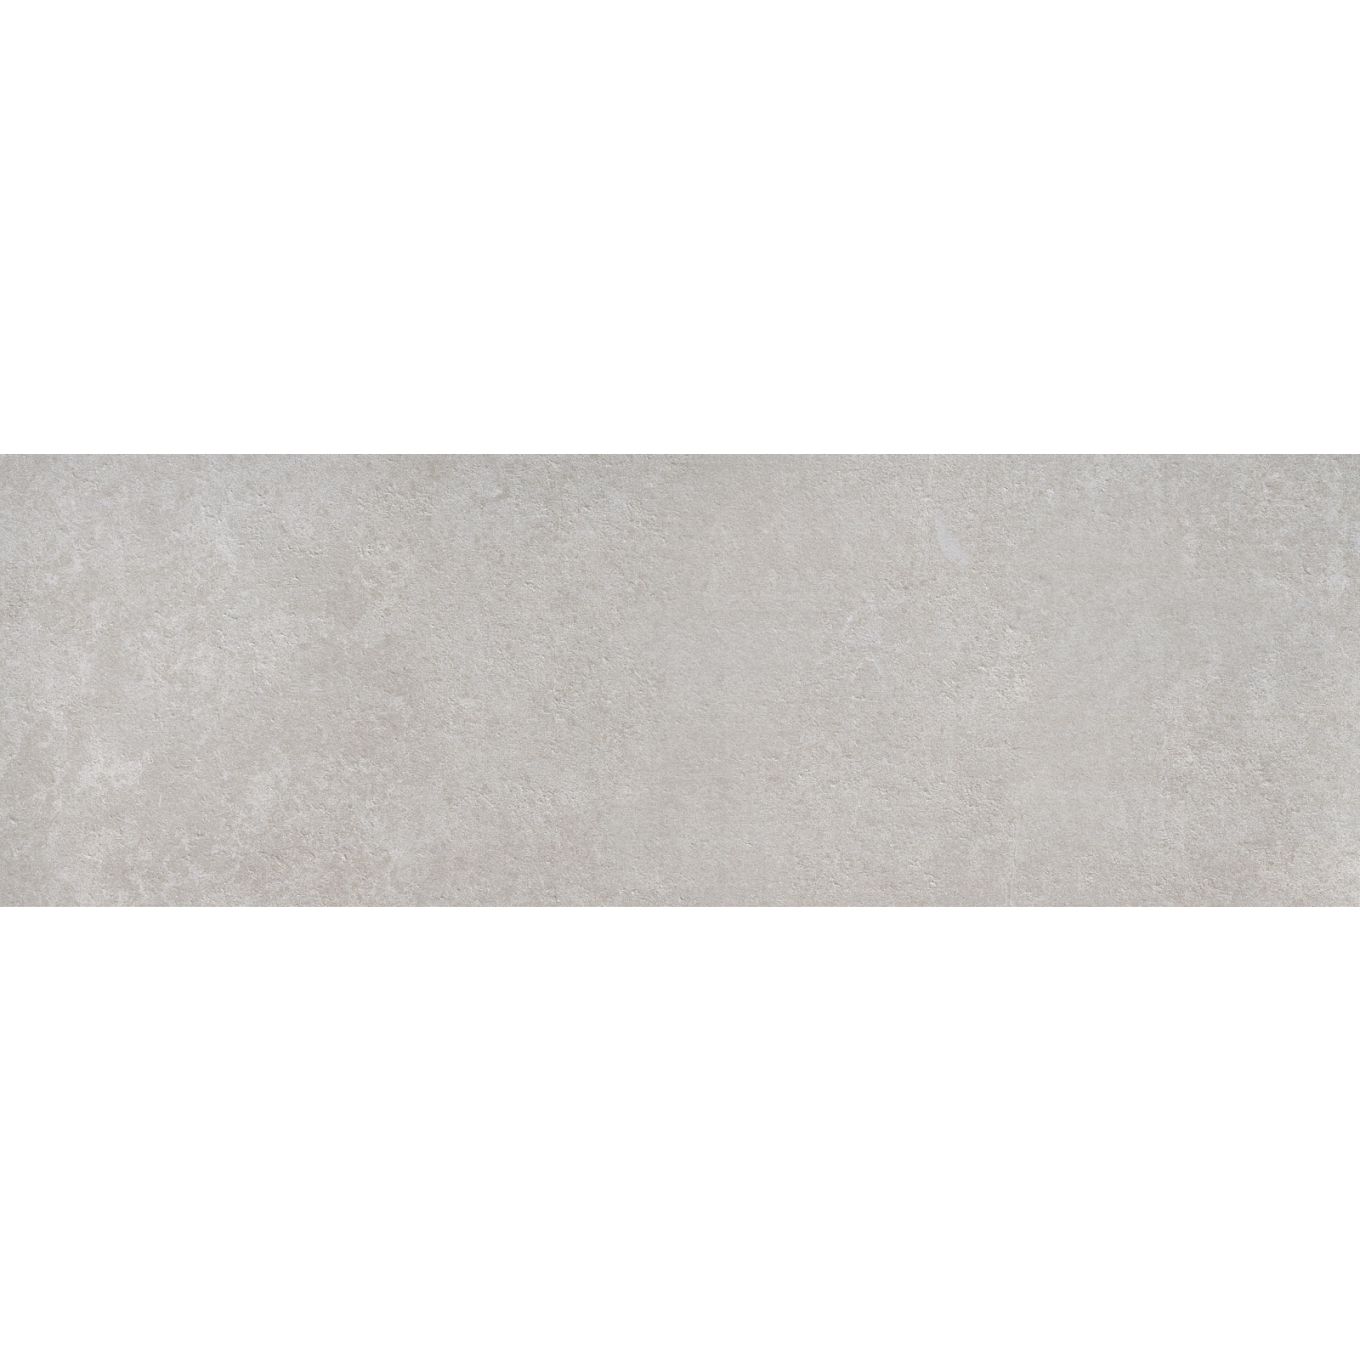 Weave Gris Rectified Ceramic Tile 300 x 900mm